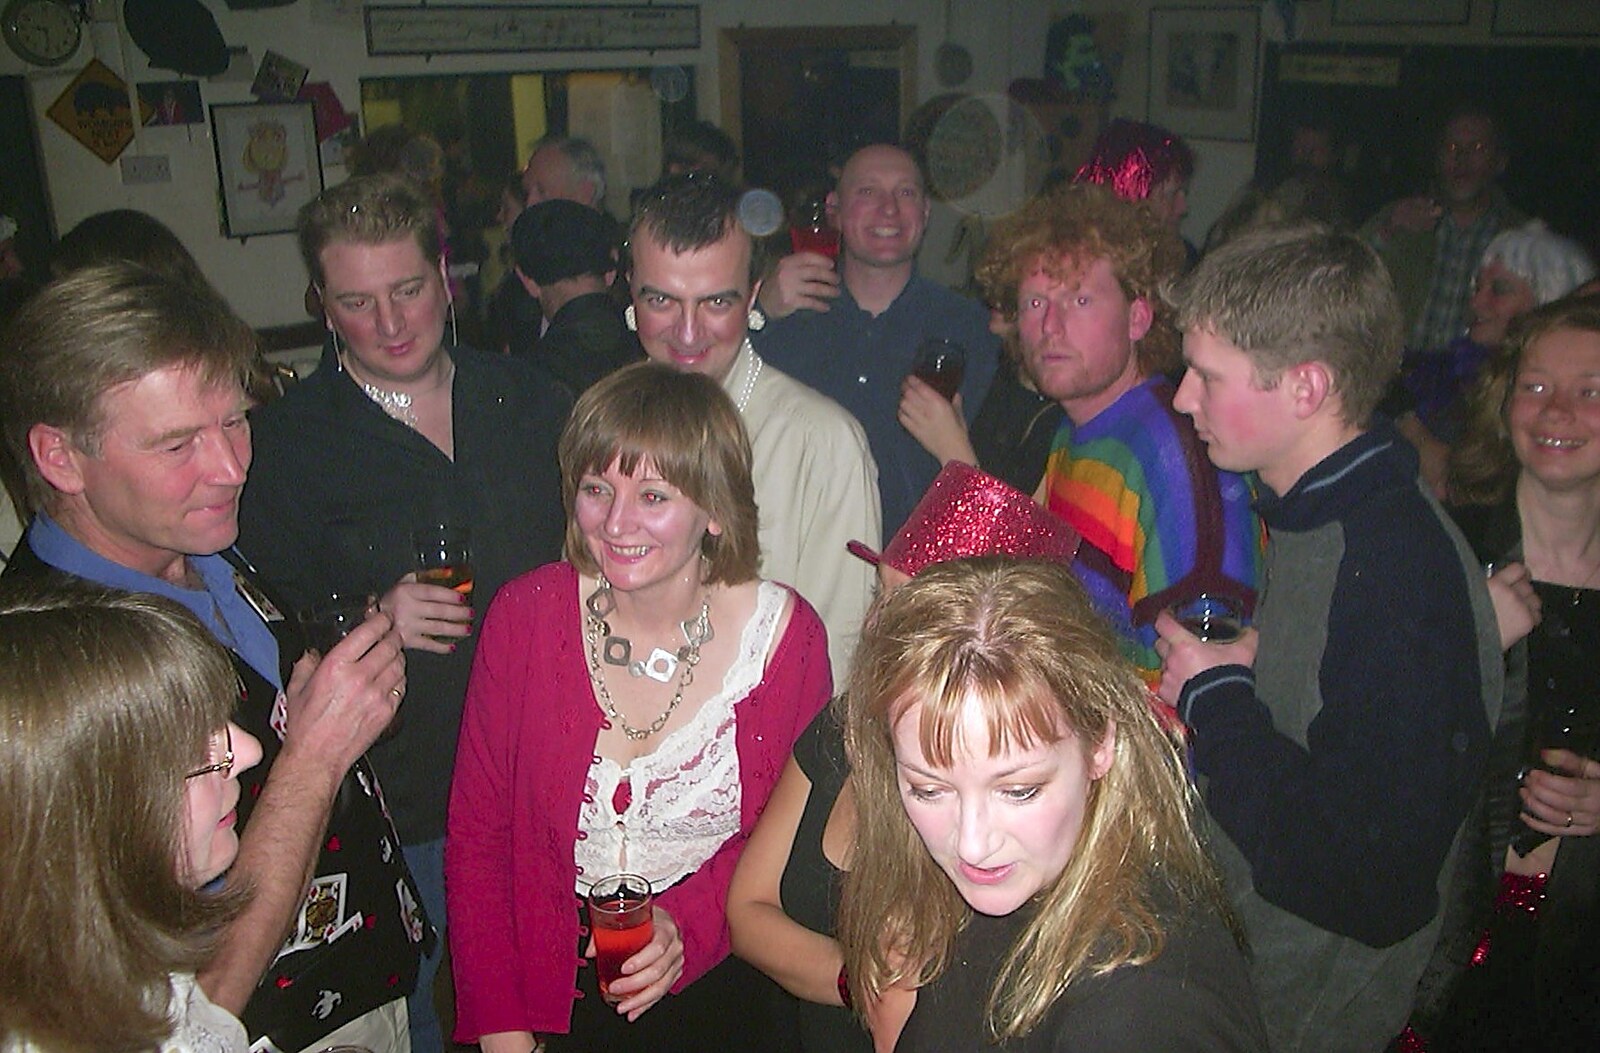 More crowds from The BBs do New Year's Eve at The Cider Shed, Banham, Norfolk - 31st December 2003